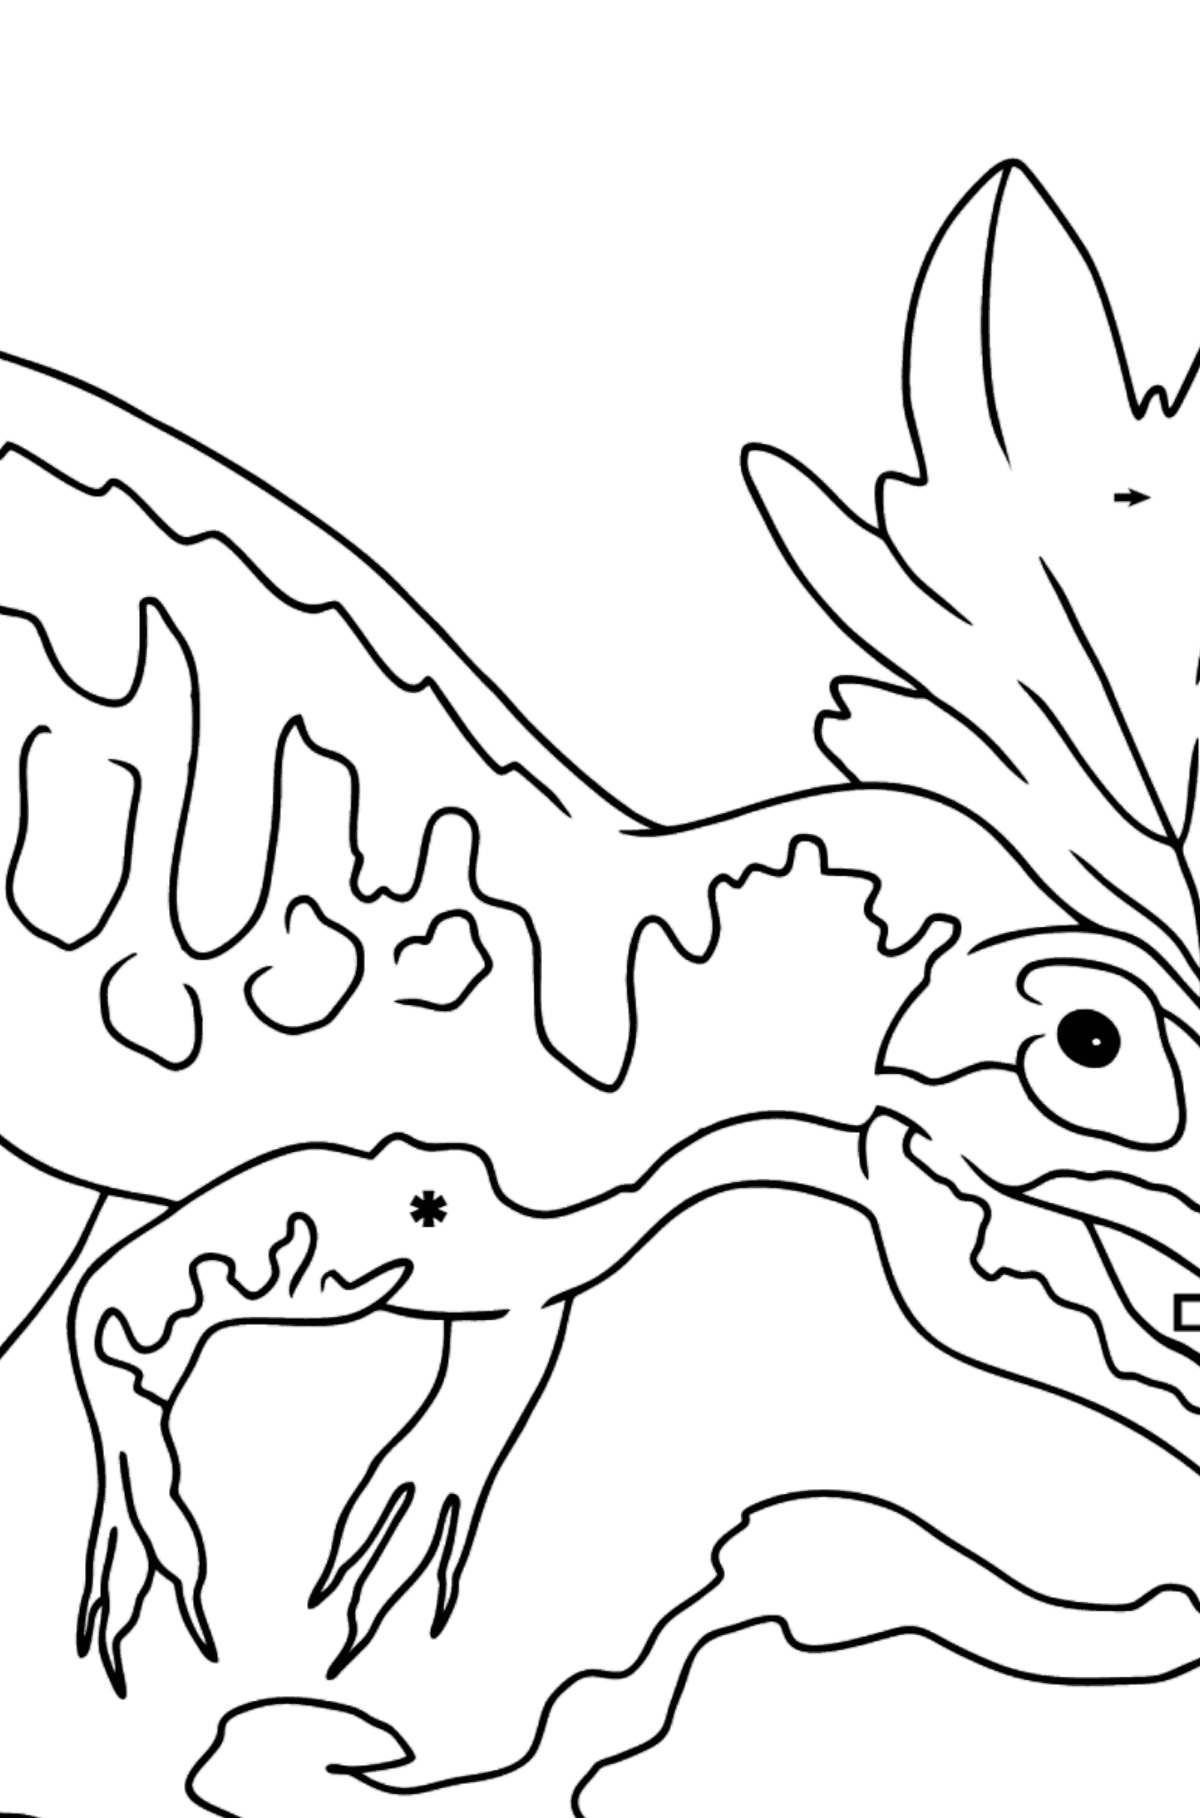 Allosaurus Coloring Page - Coloring by Symbols for Kids